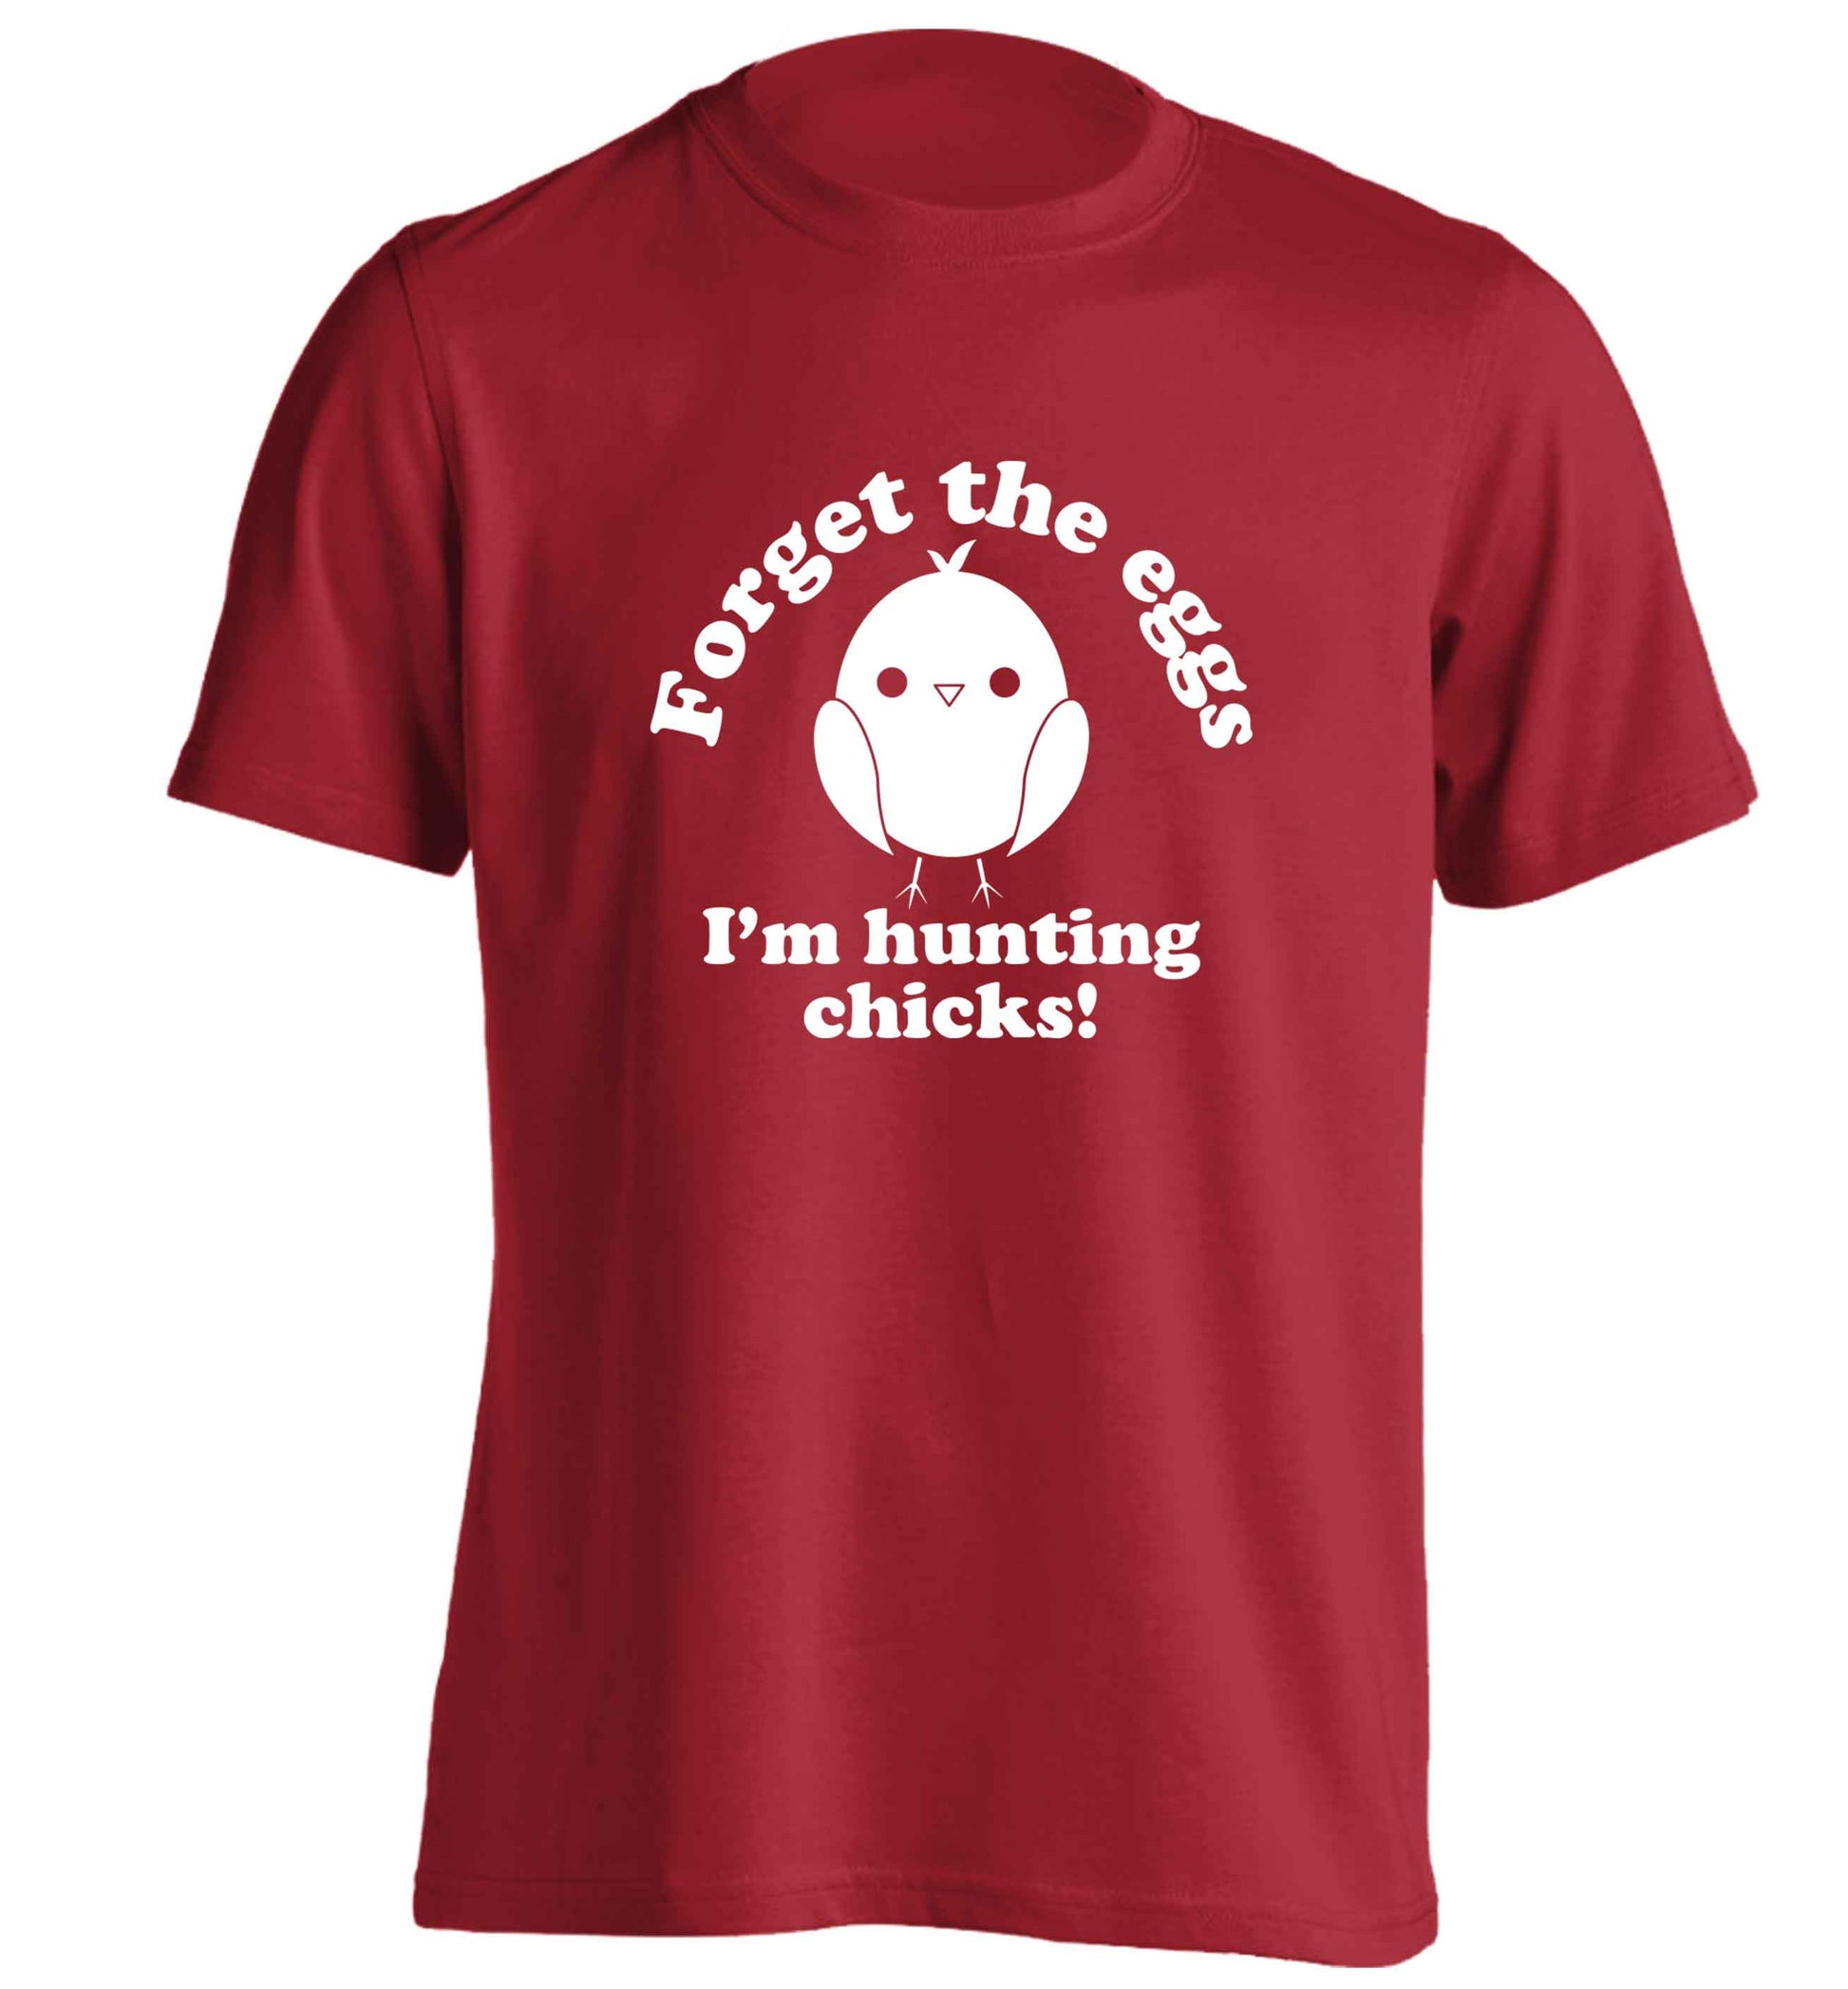 Forget the eggs I'm hunting chicks! adults unisex red Tshirt 2XL